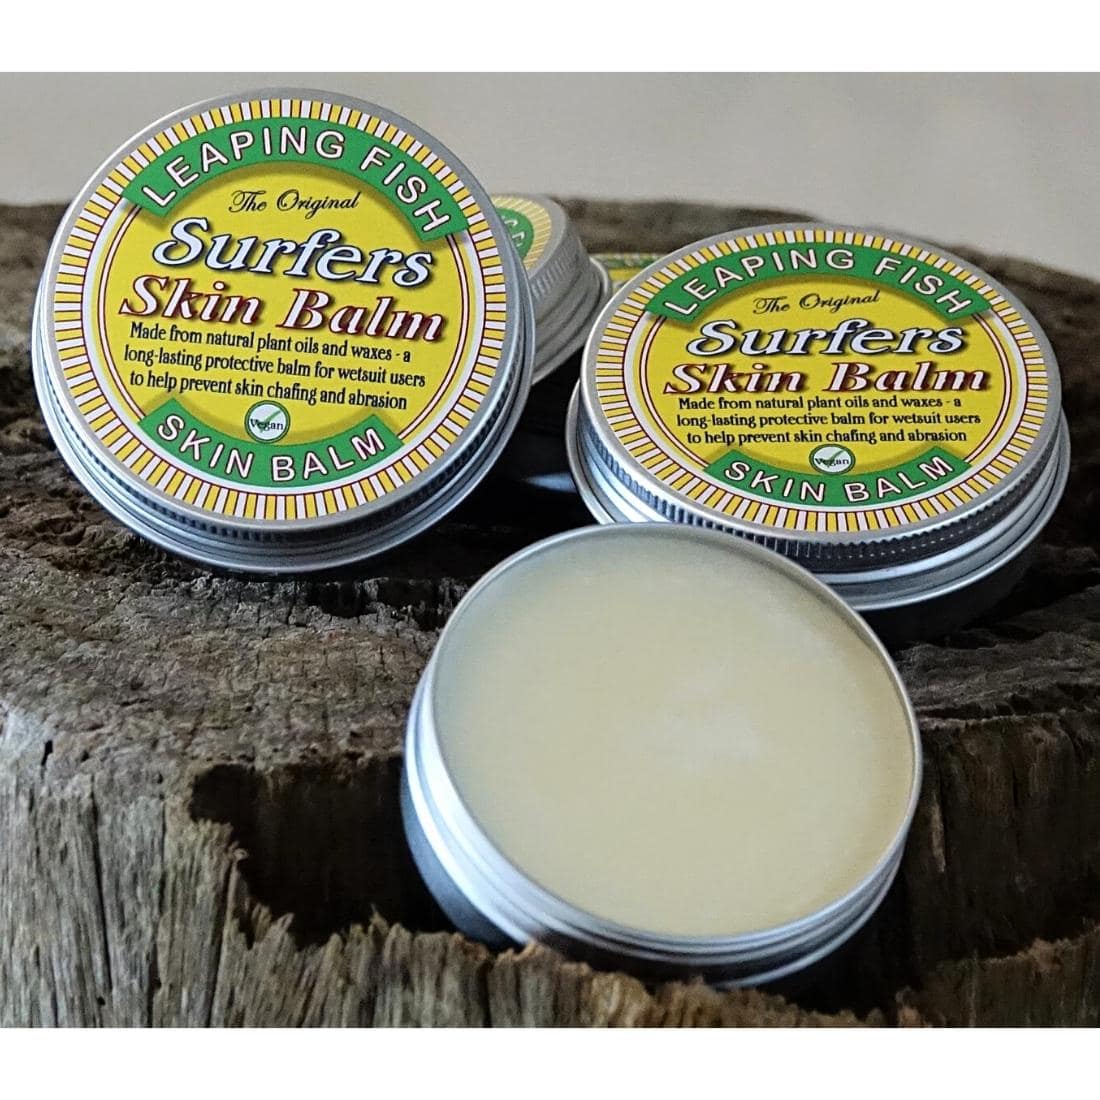 Leaping Fish Surfers Skin Balm & Wetsuit Lube - 60g - Skin Care by Leaping Fish 60g